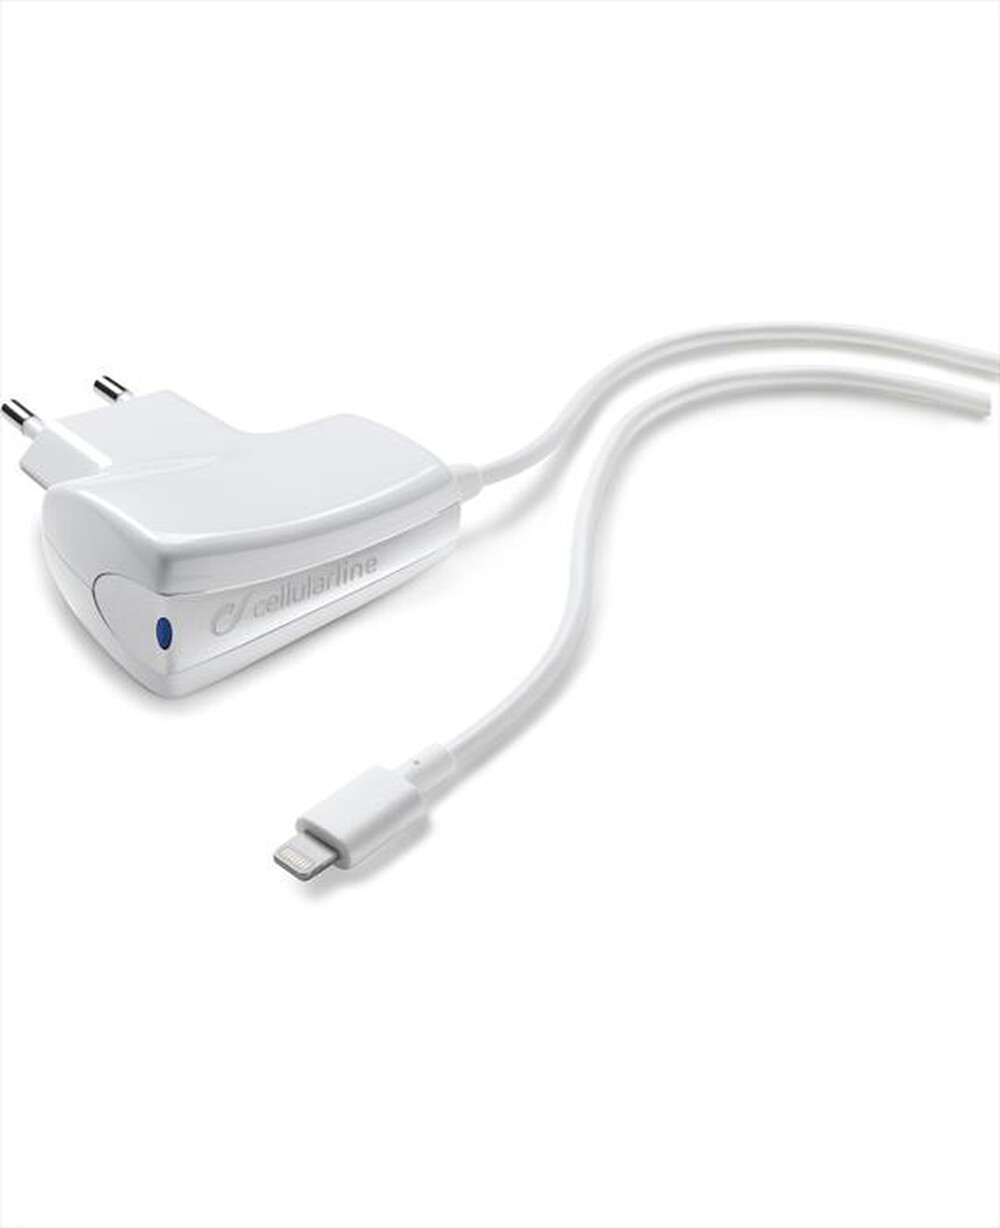 "CELLULARLINE - CHARGER MADE FOR IPHONE 5-Bianco"